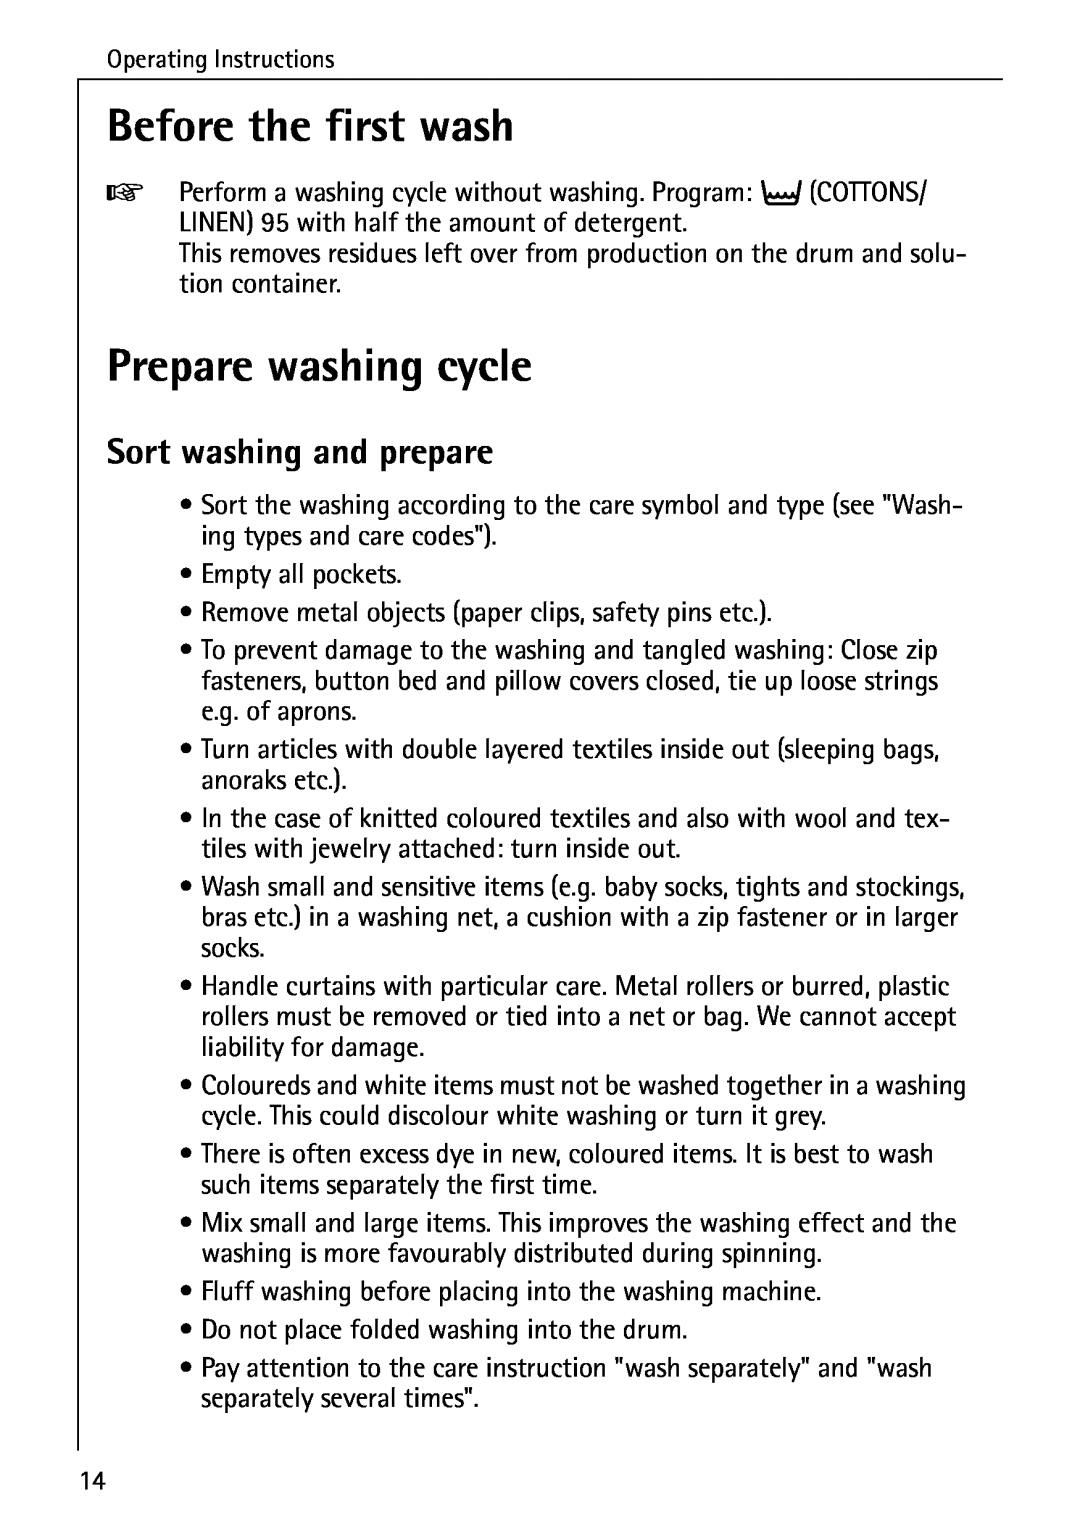 AEG 72640 manual Before the first wash, Prepare washing cycle, Sort washing and prepare 